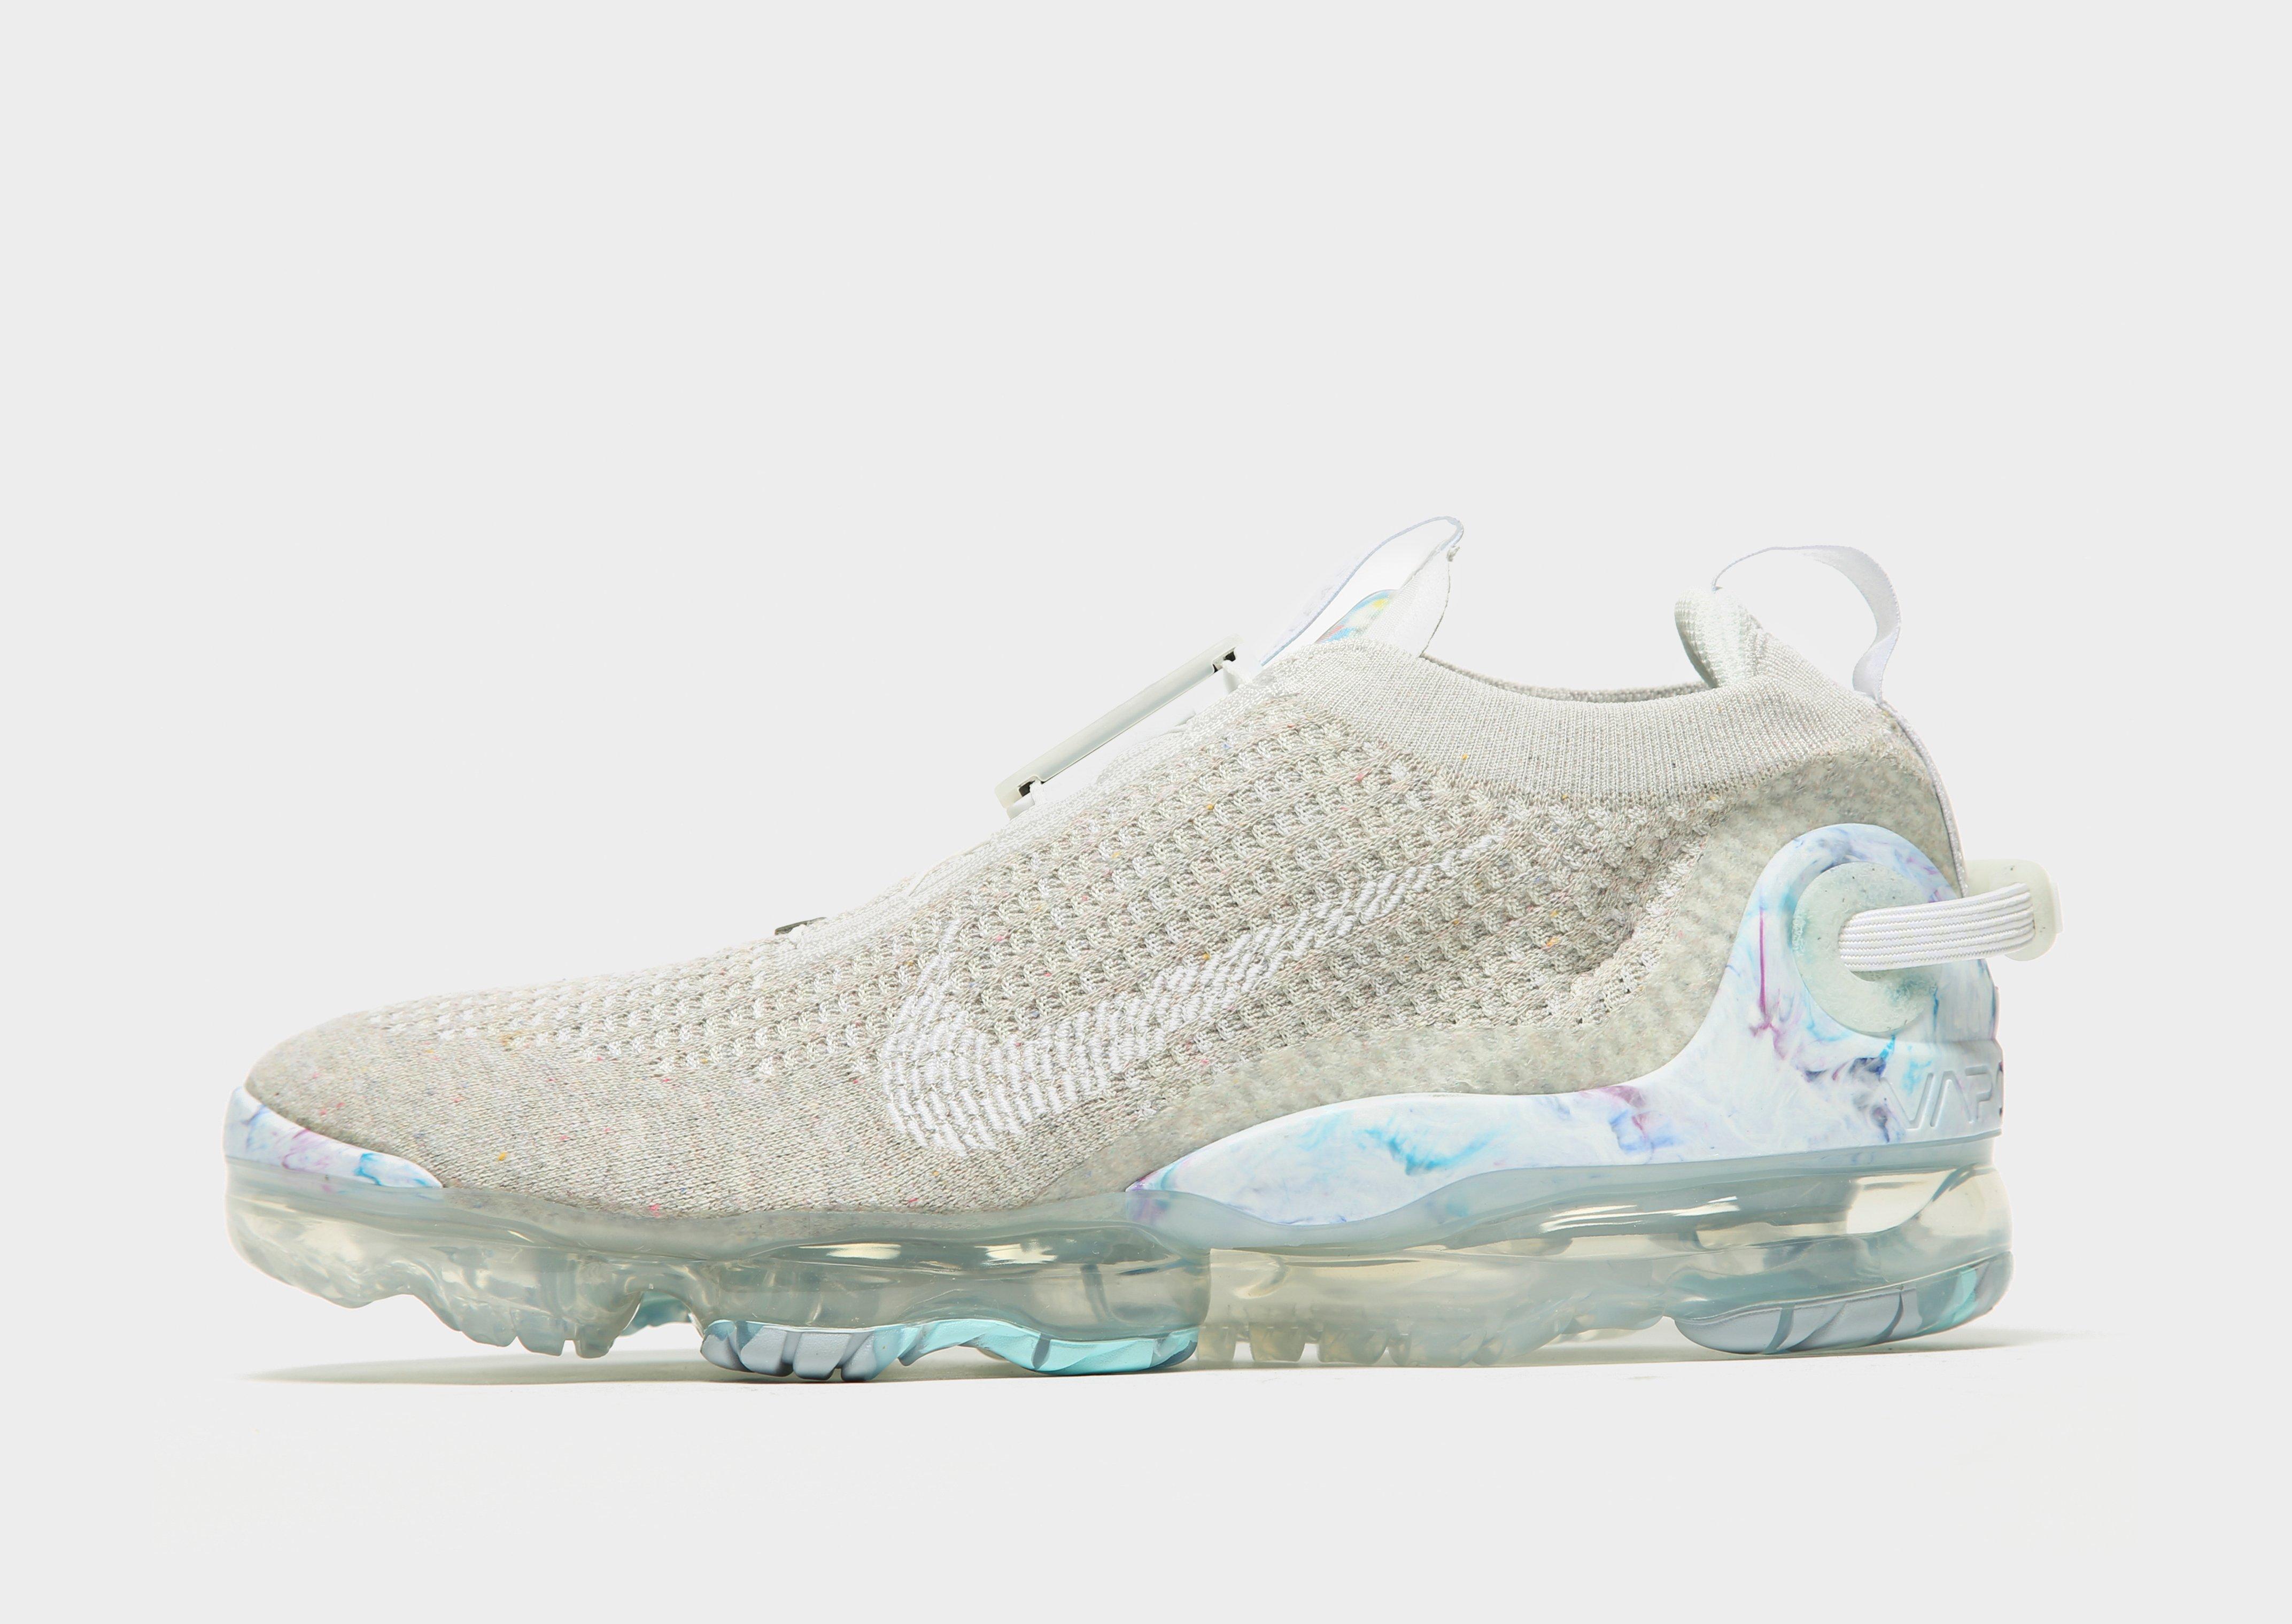 2020 vapormax Tn for 2.0 Triple white therefore green in Oreo